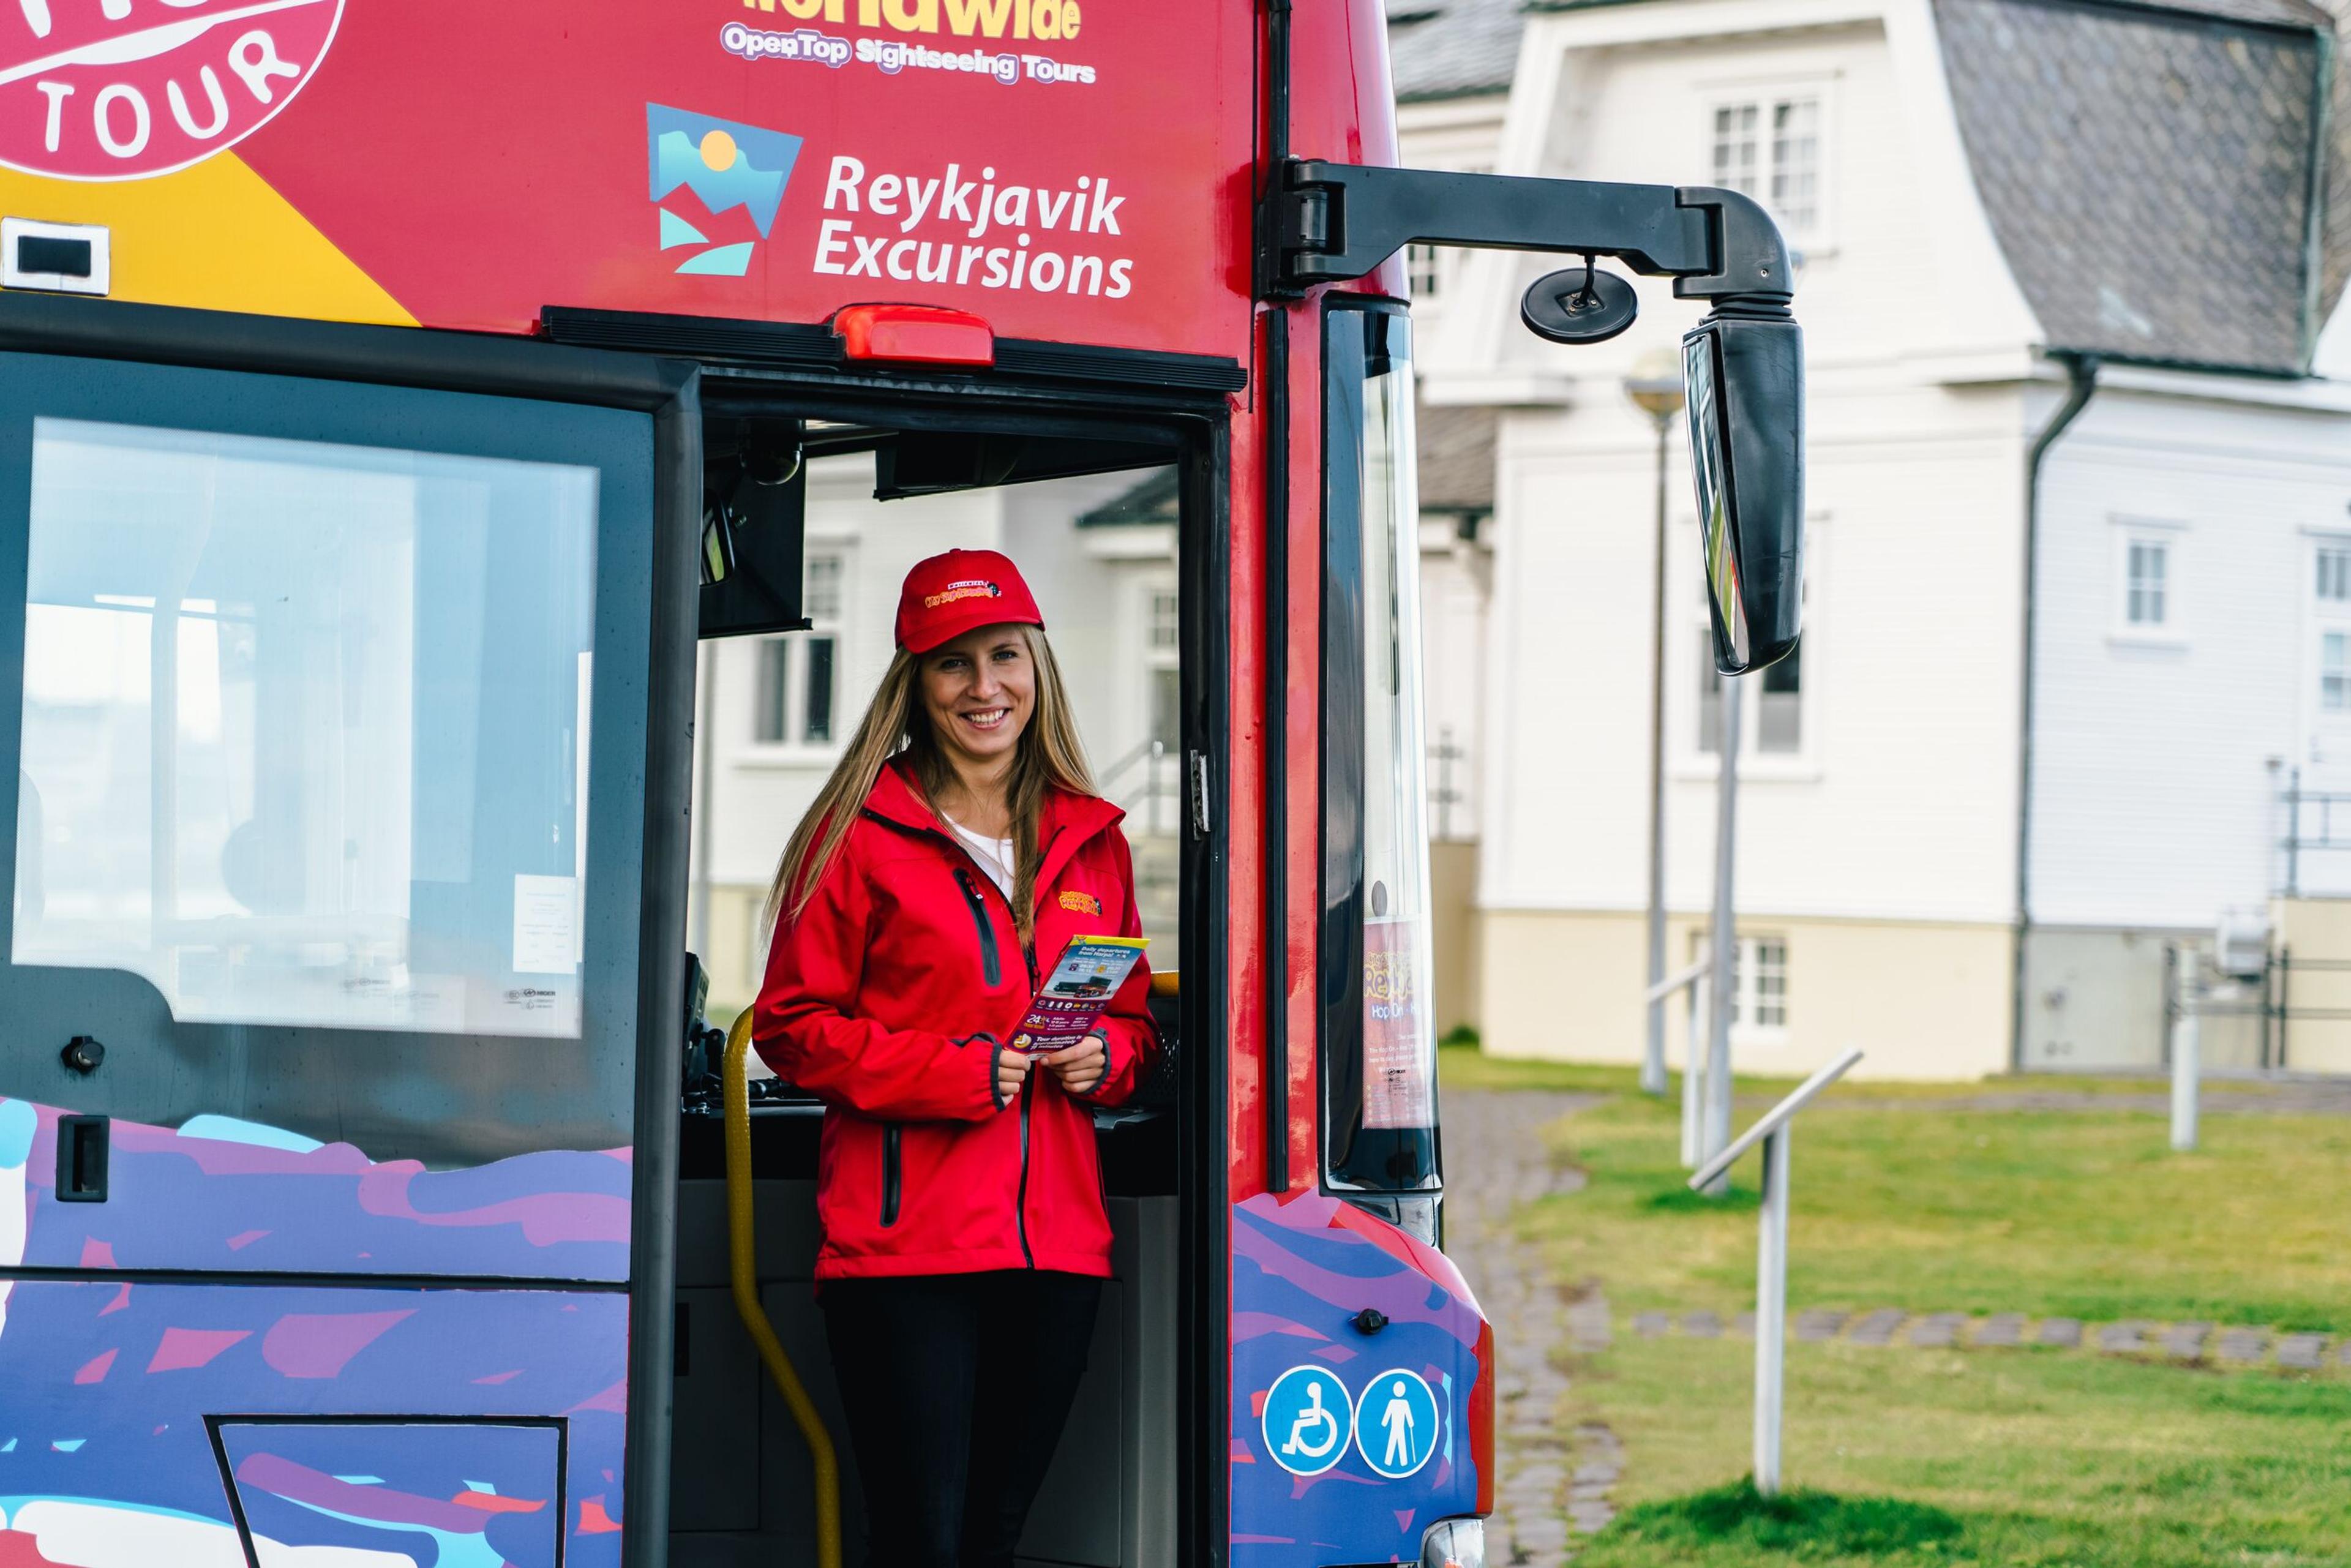 A guide standing at the entry of a Hop-on Hop-off bus greeting people.